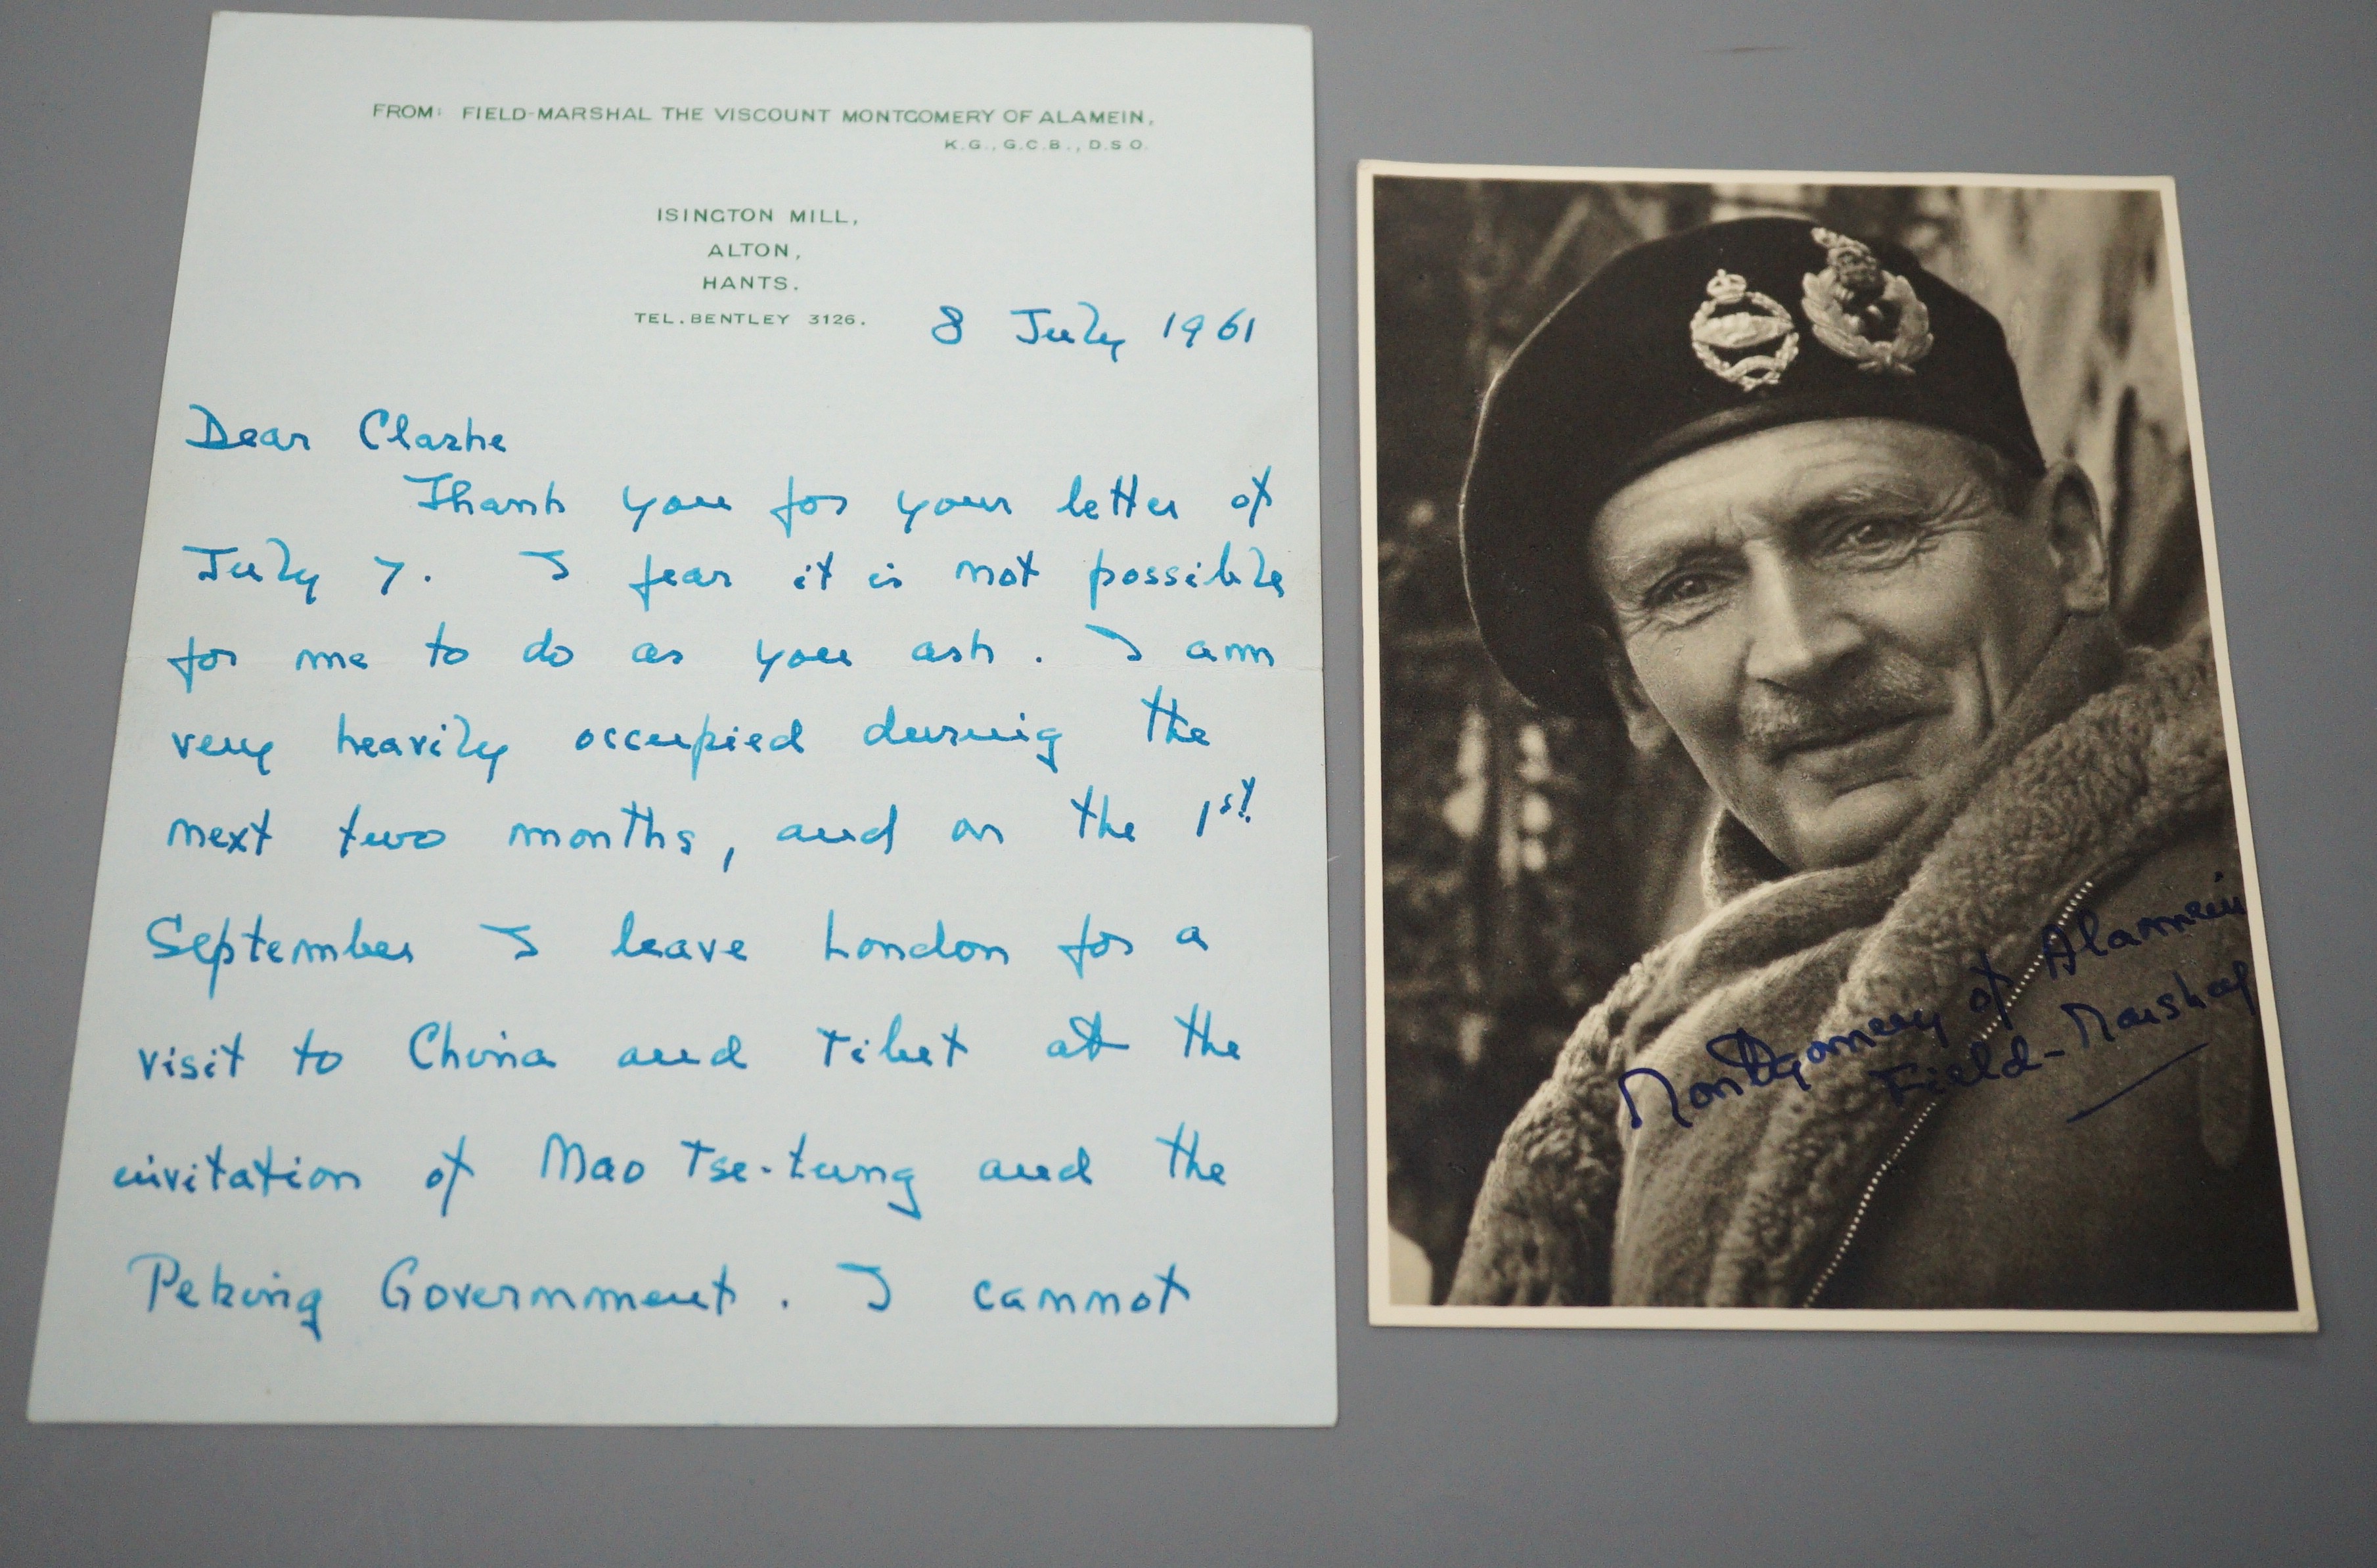 Field Marshall Montgomery of Alamein, signed photograph and interesting letter, 1961 relating to China relations